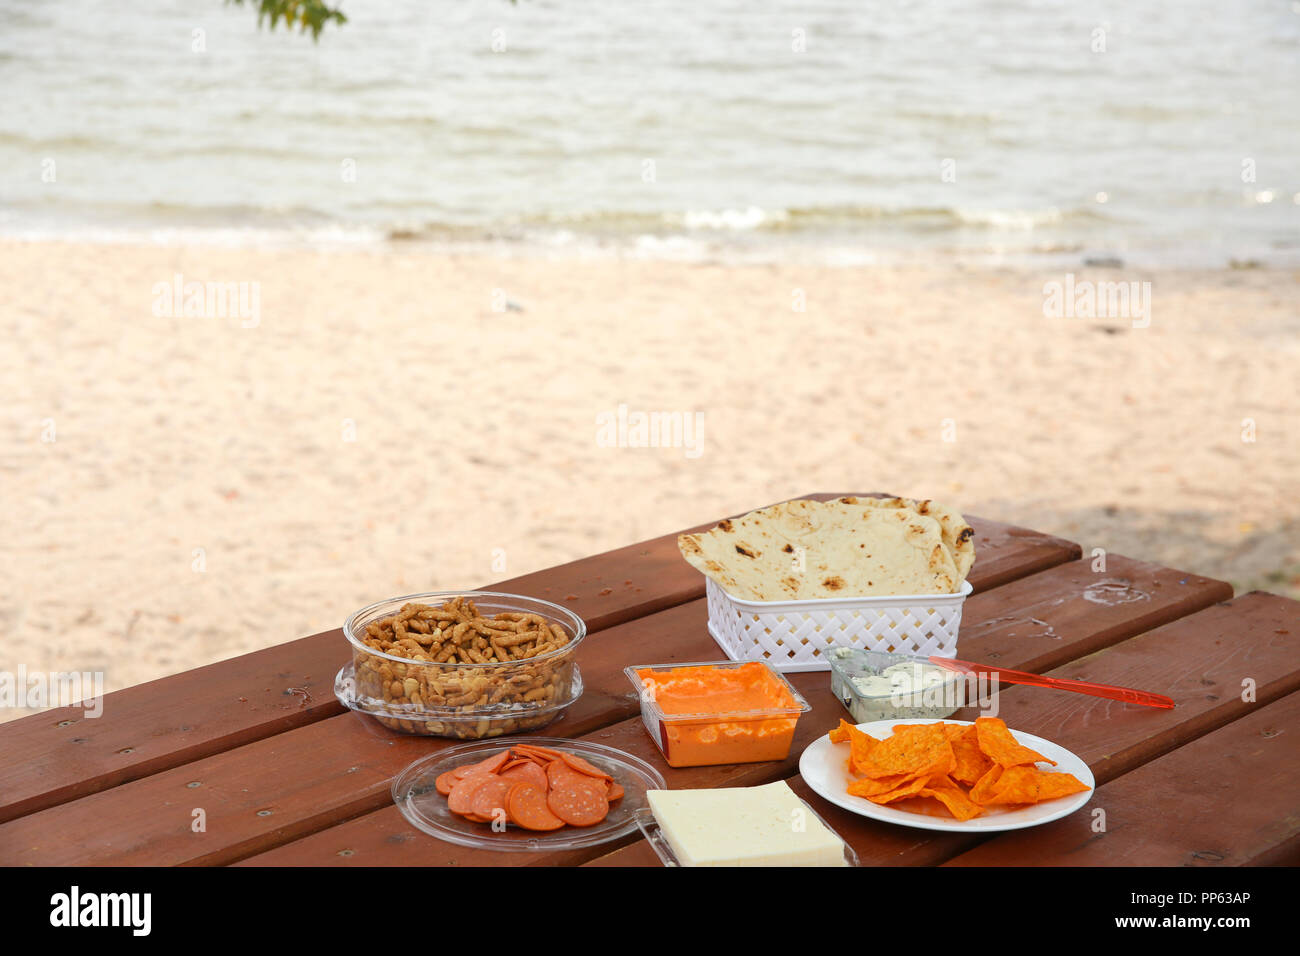 A delicious picnic table along the lake. Lake of the Woods, Kenora, Canada. Stock Photo